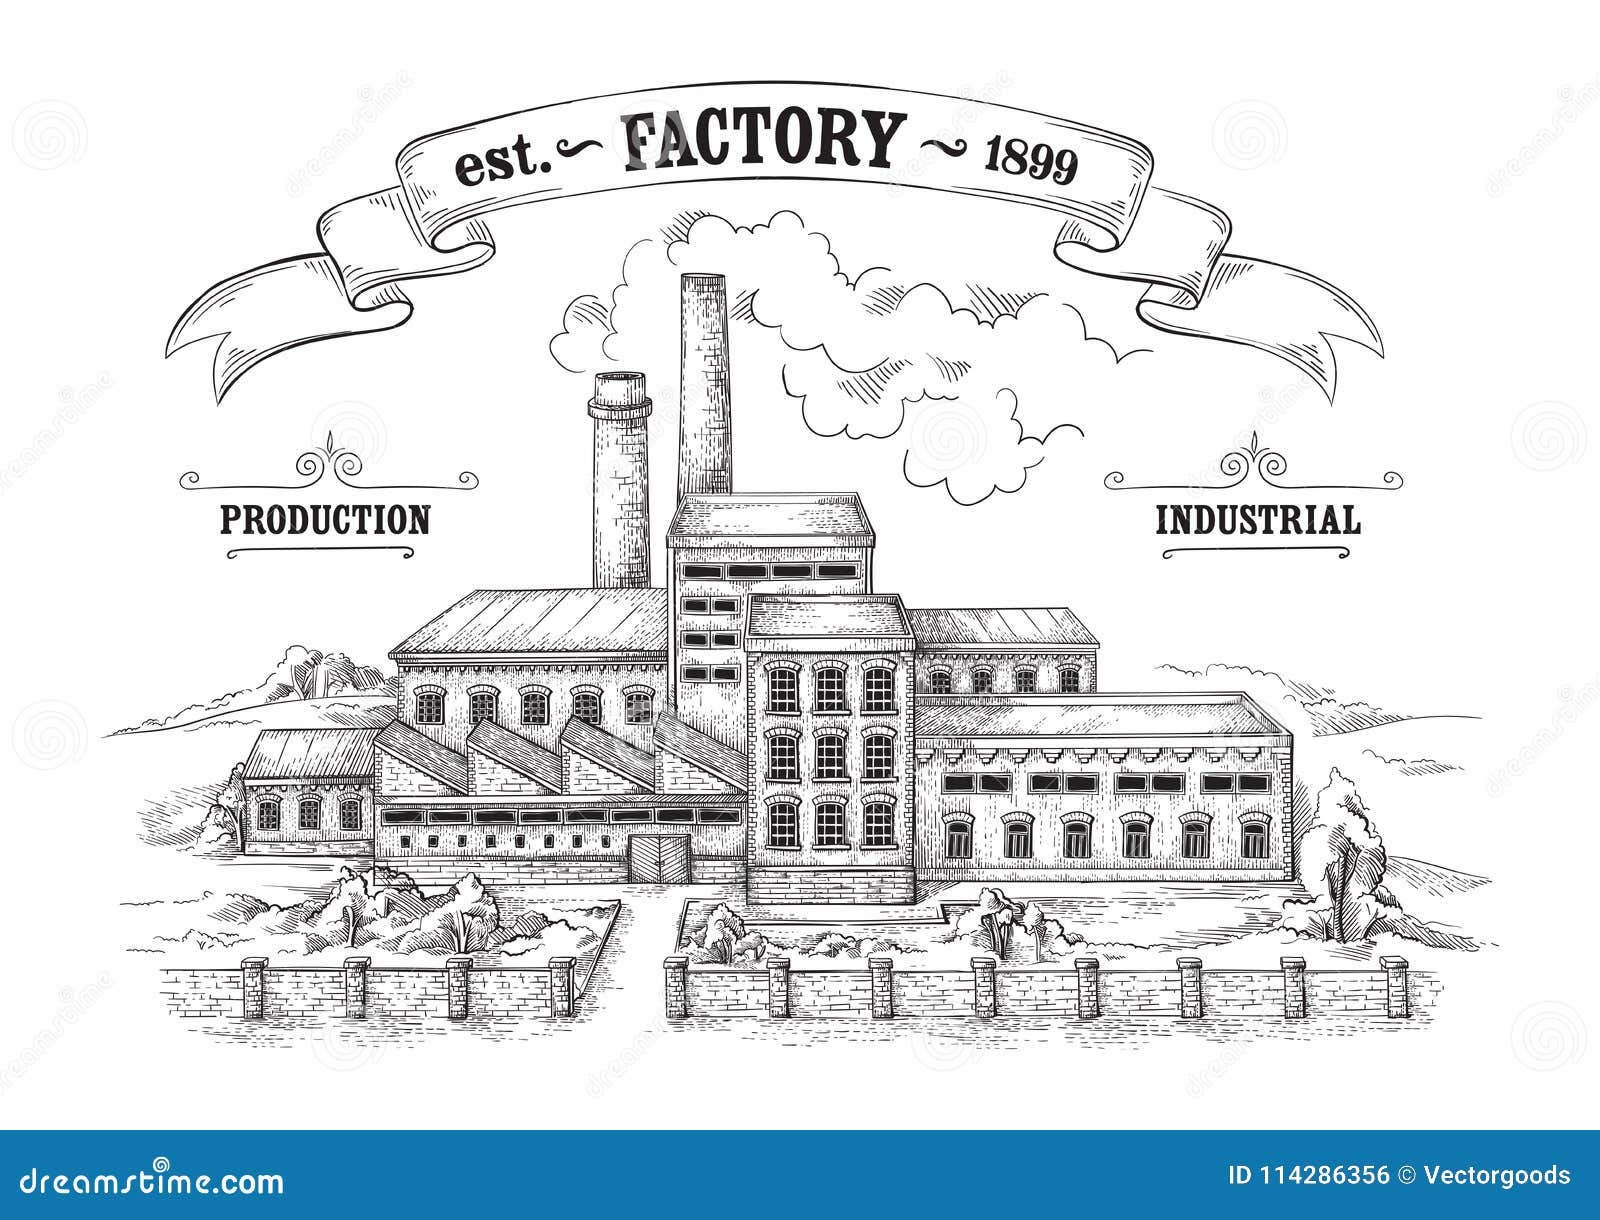 The Industrial Revolution. - ppt download